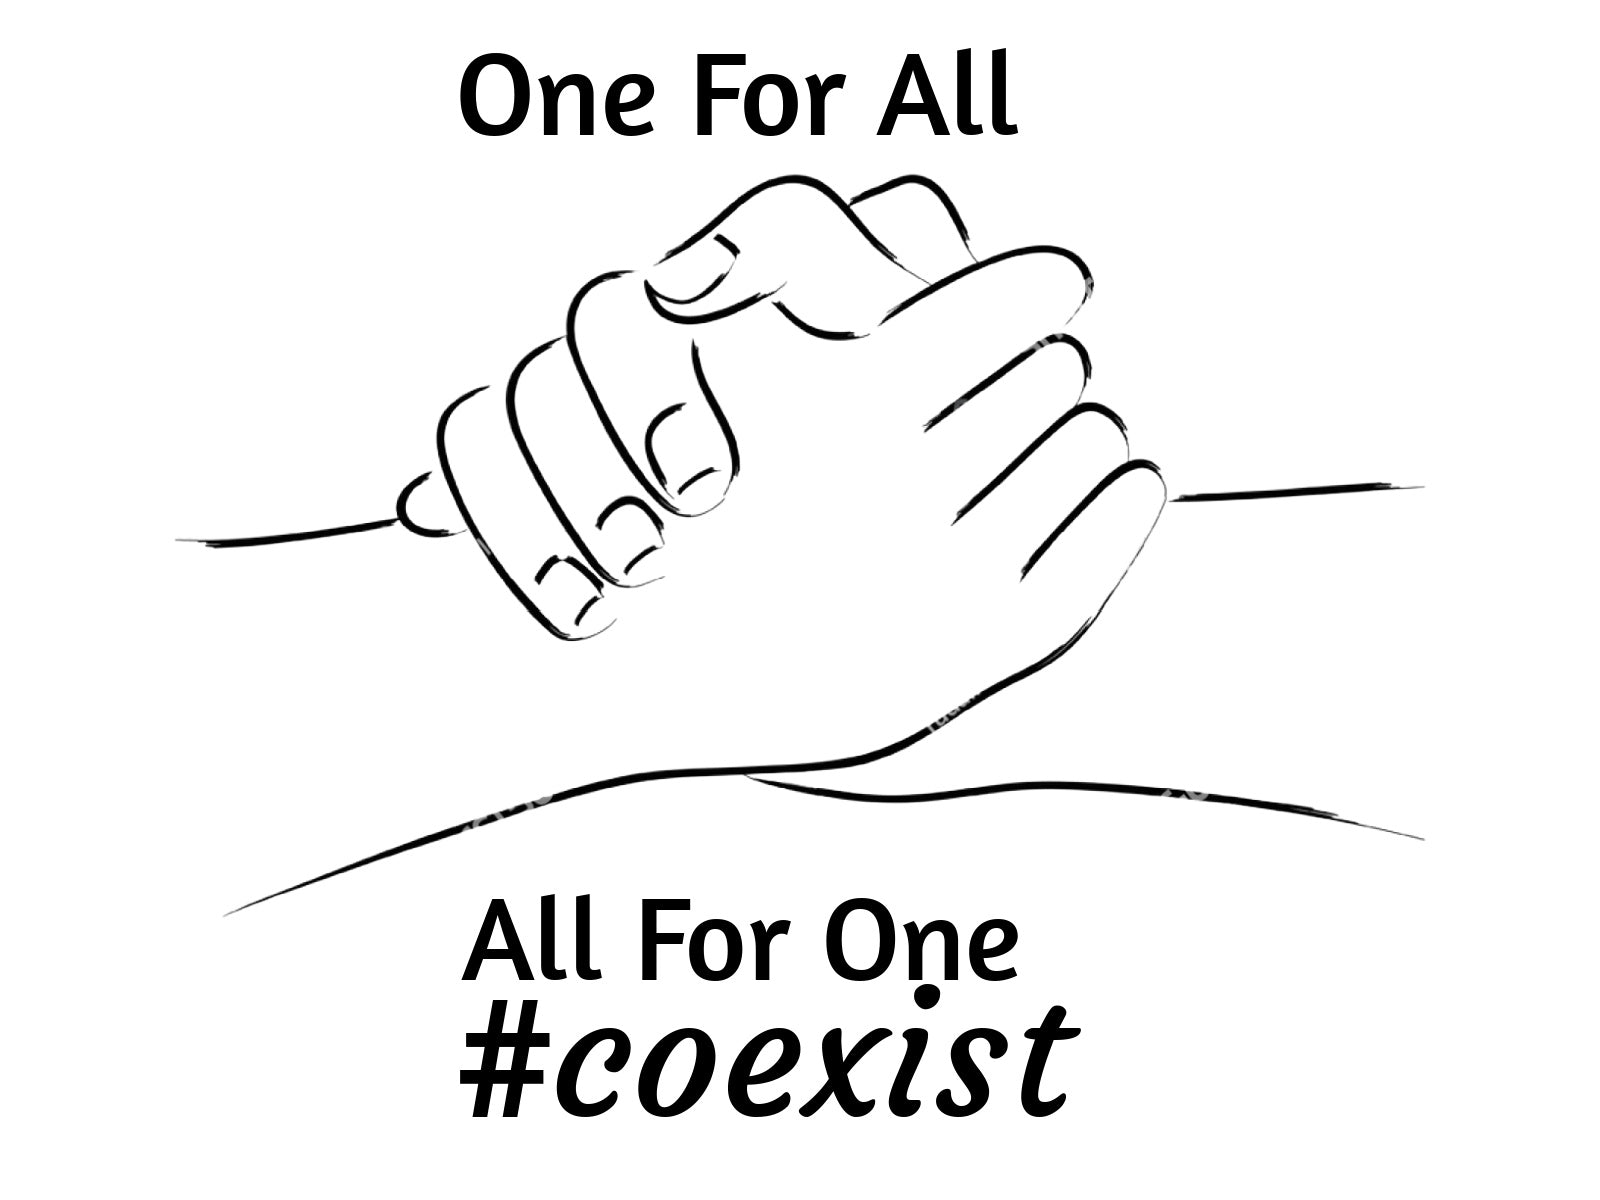 One For All All For One #coexist